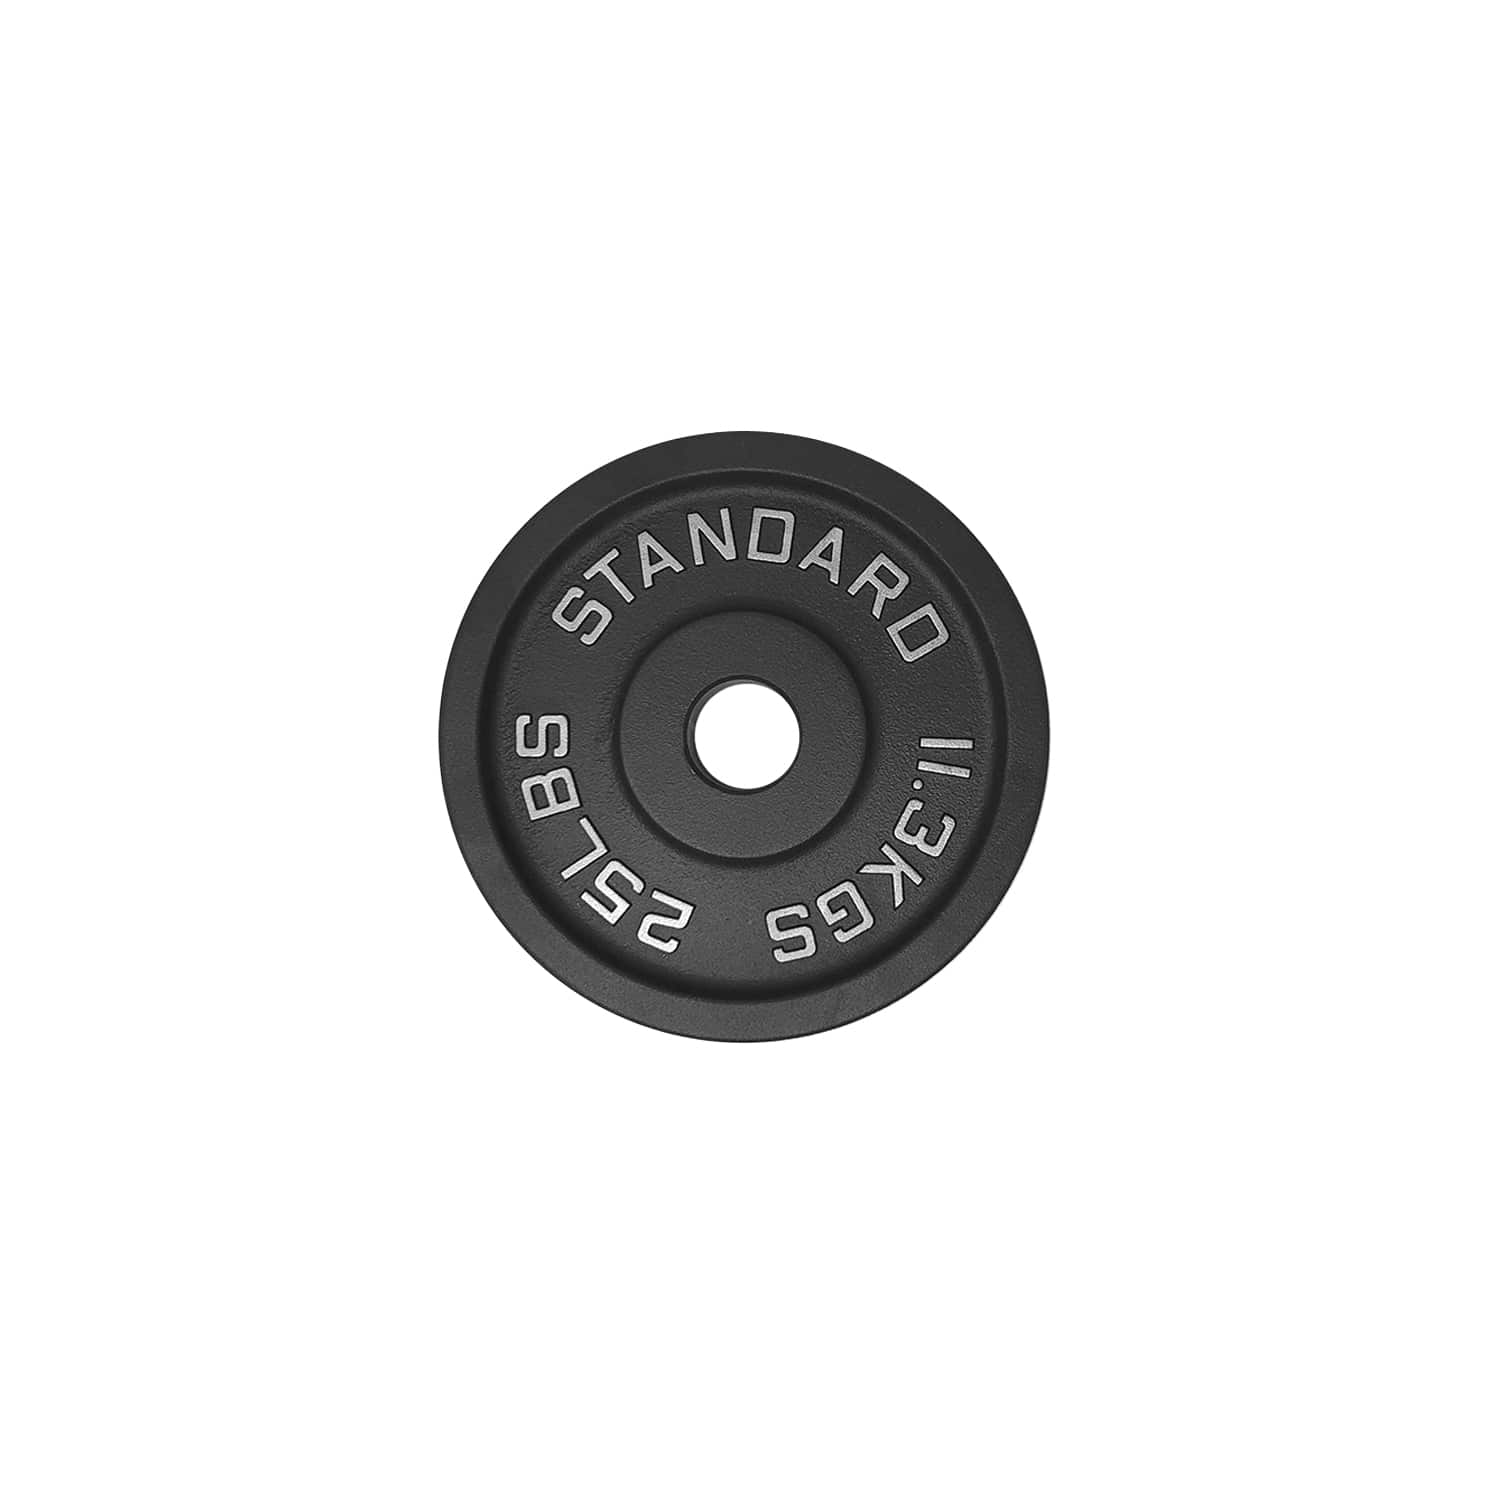 Mighty Fitness Cast Iron - Barbell Standard - Elite Series 25LB